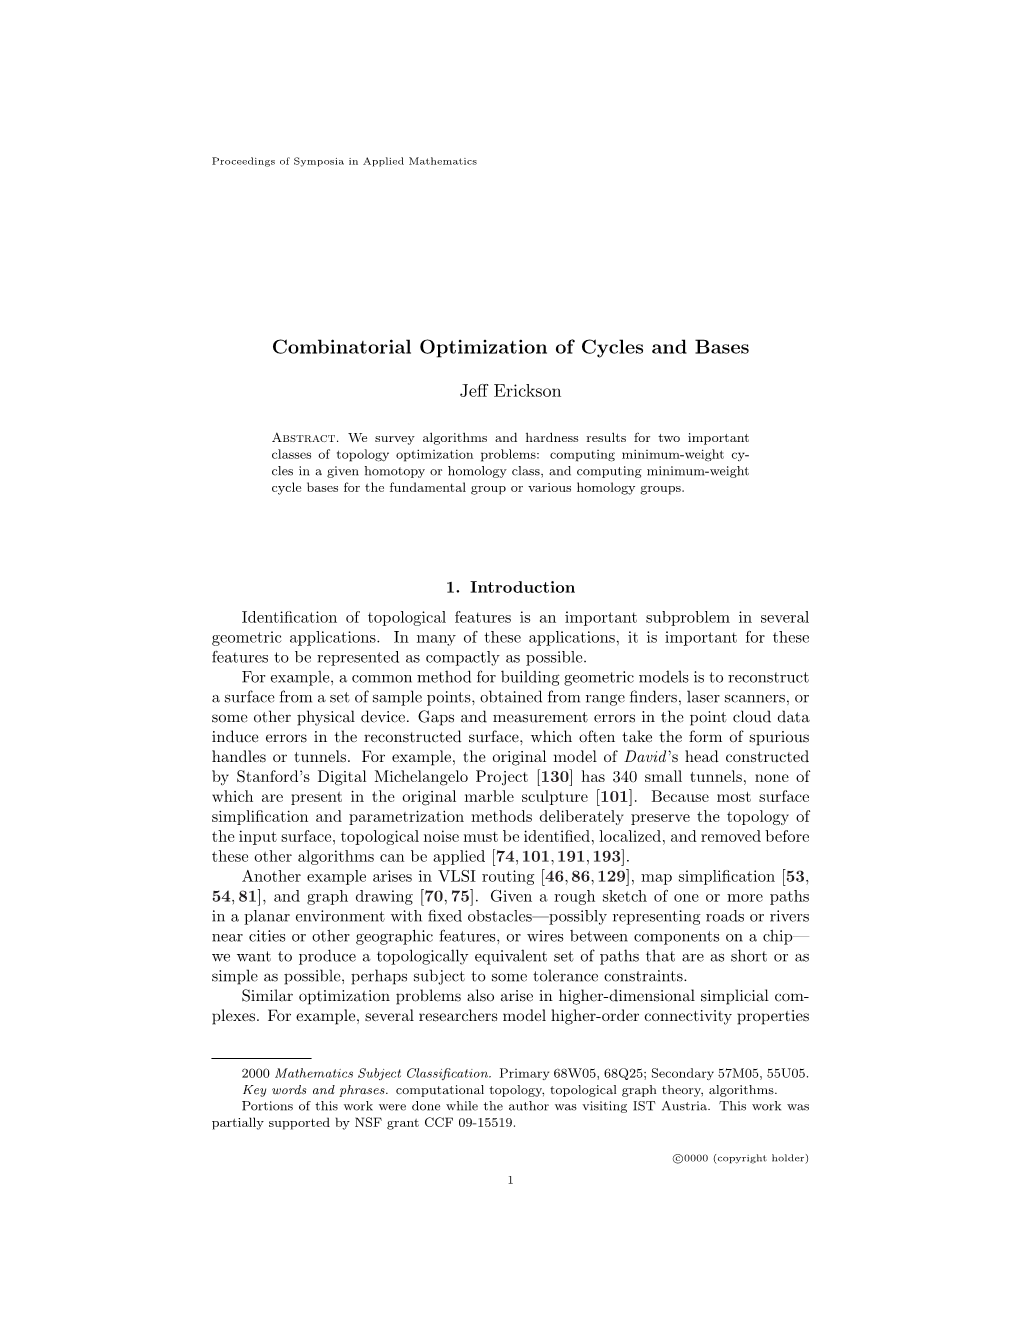 Combinatorial Optimization of Cycles and Bases